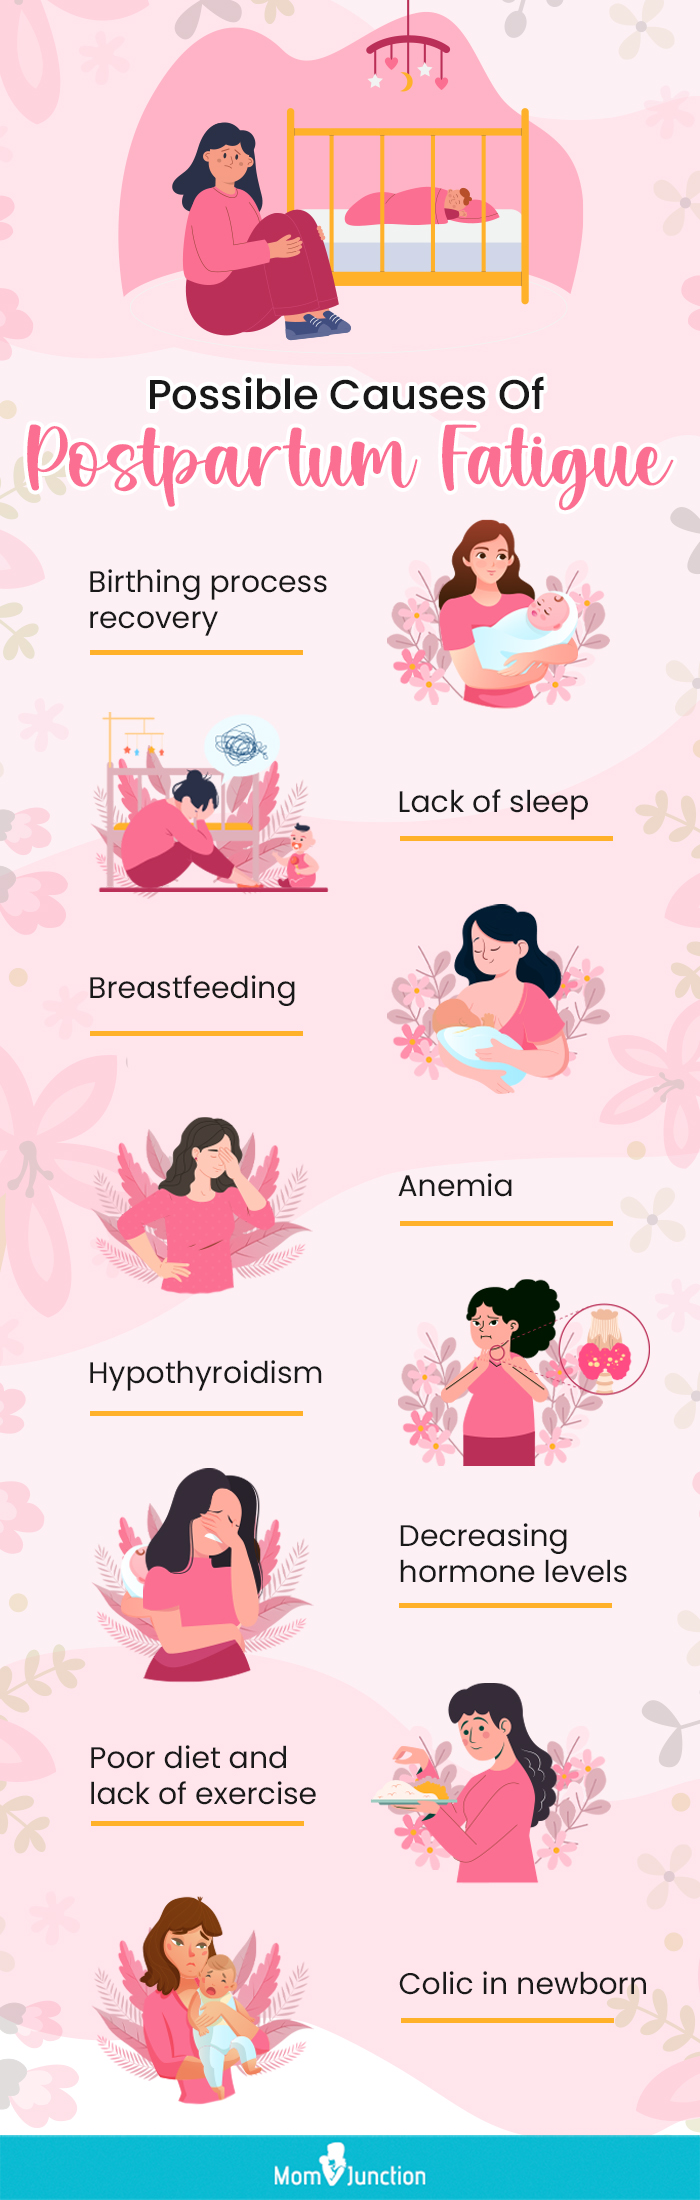 possible causes of postpartum fatigue (infographic)